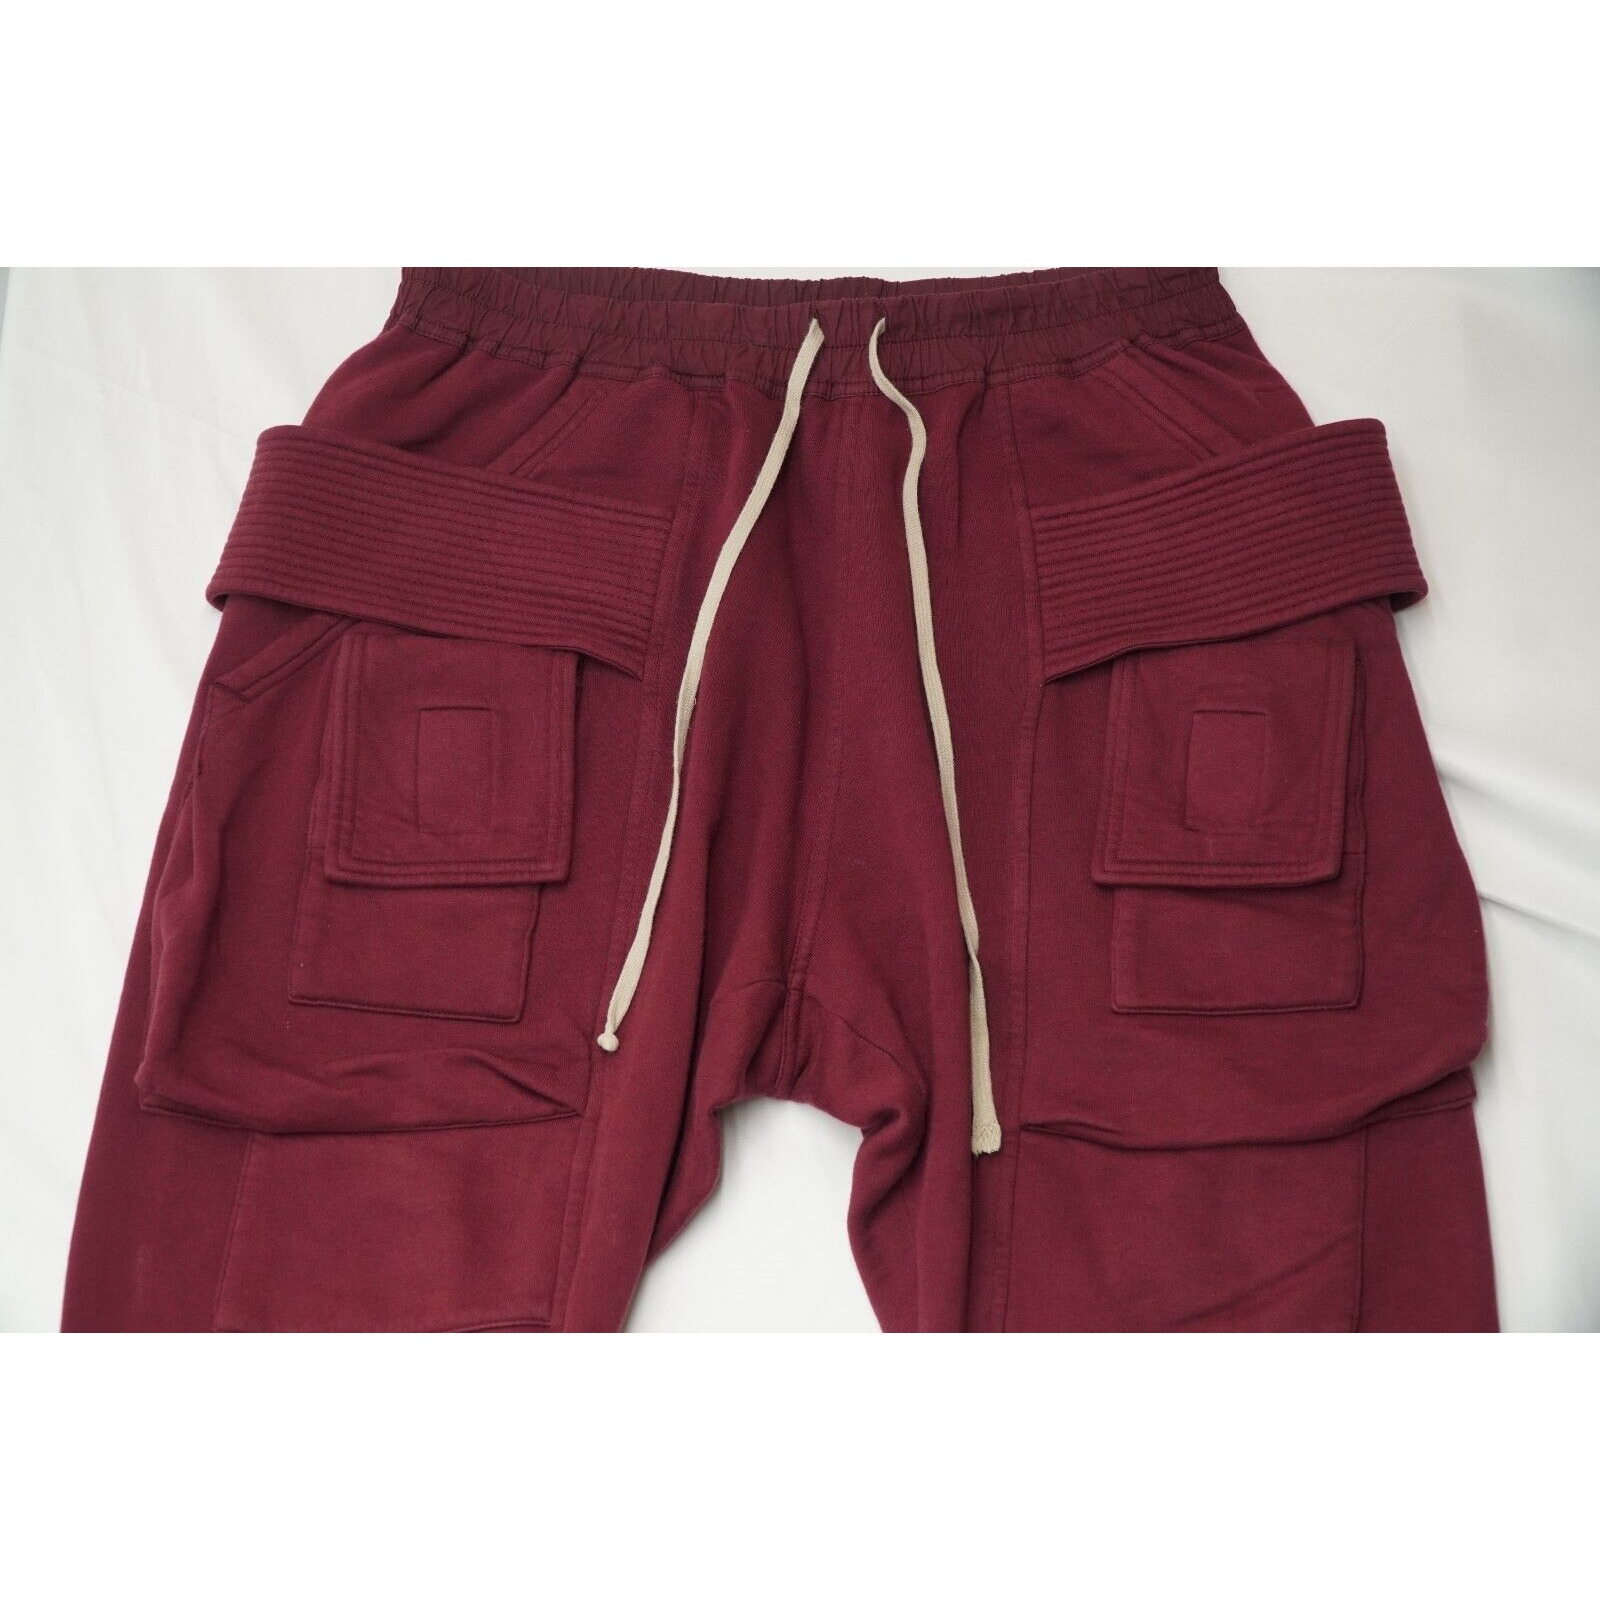 Rick Creatch Cargo Cropped Sweatpant Bruise Red FW20 - 5